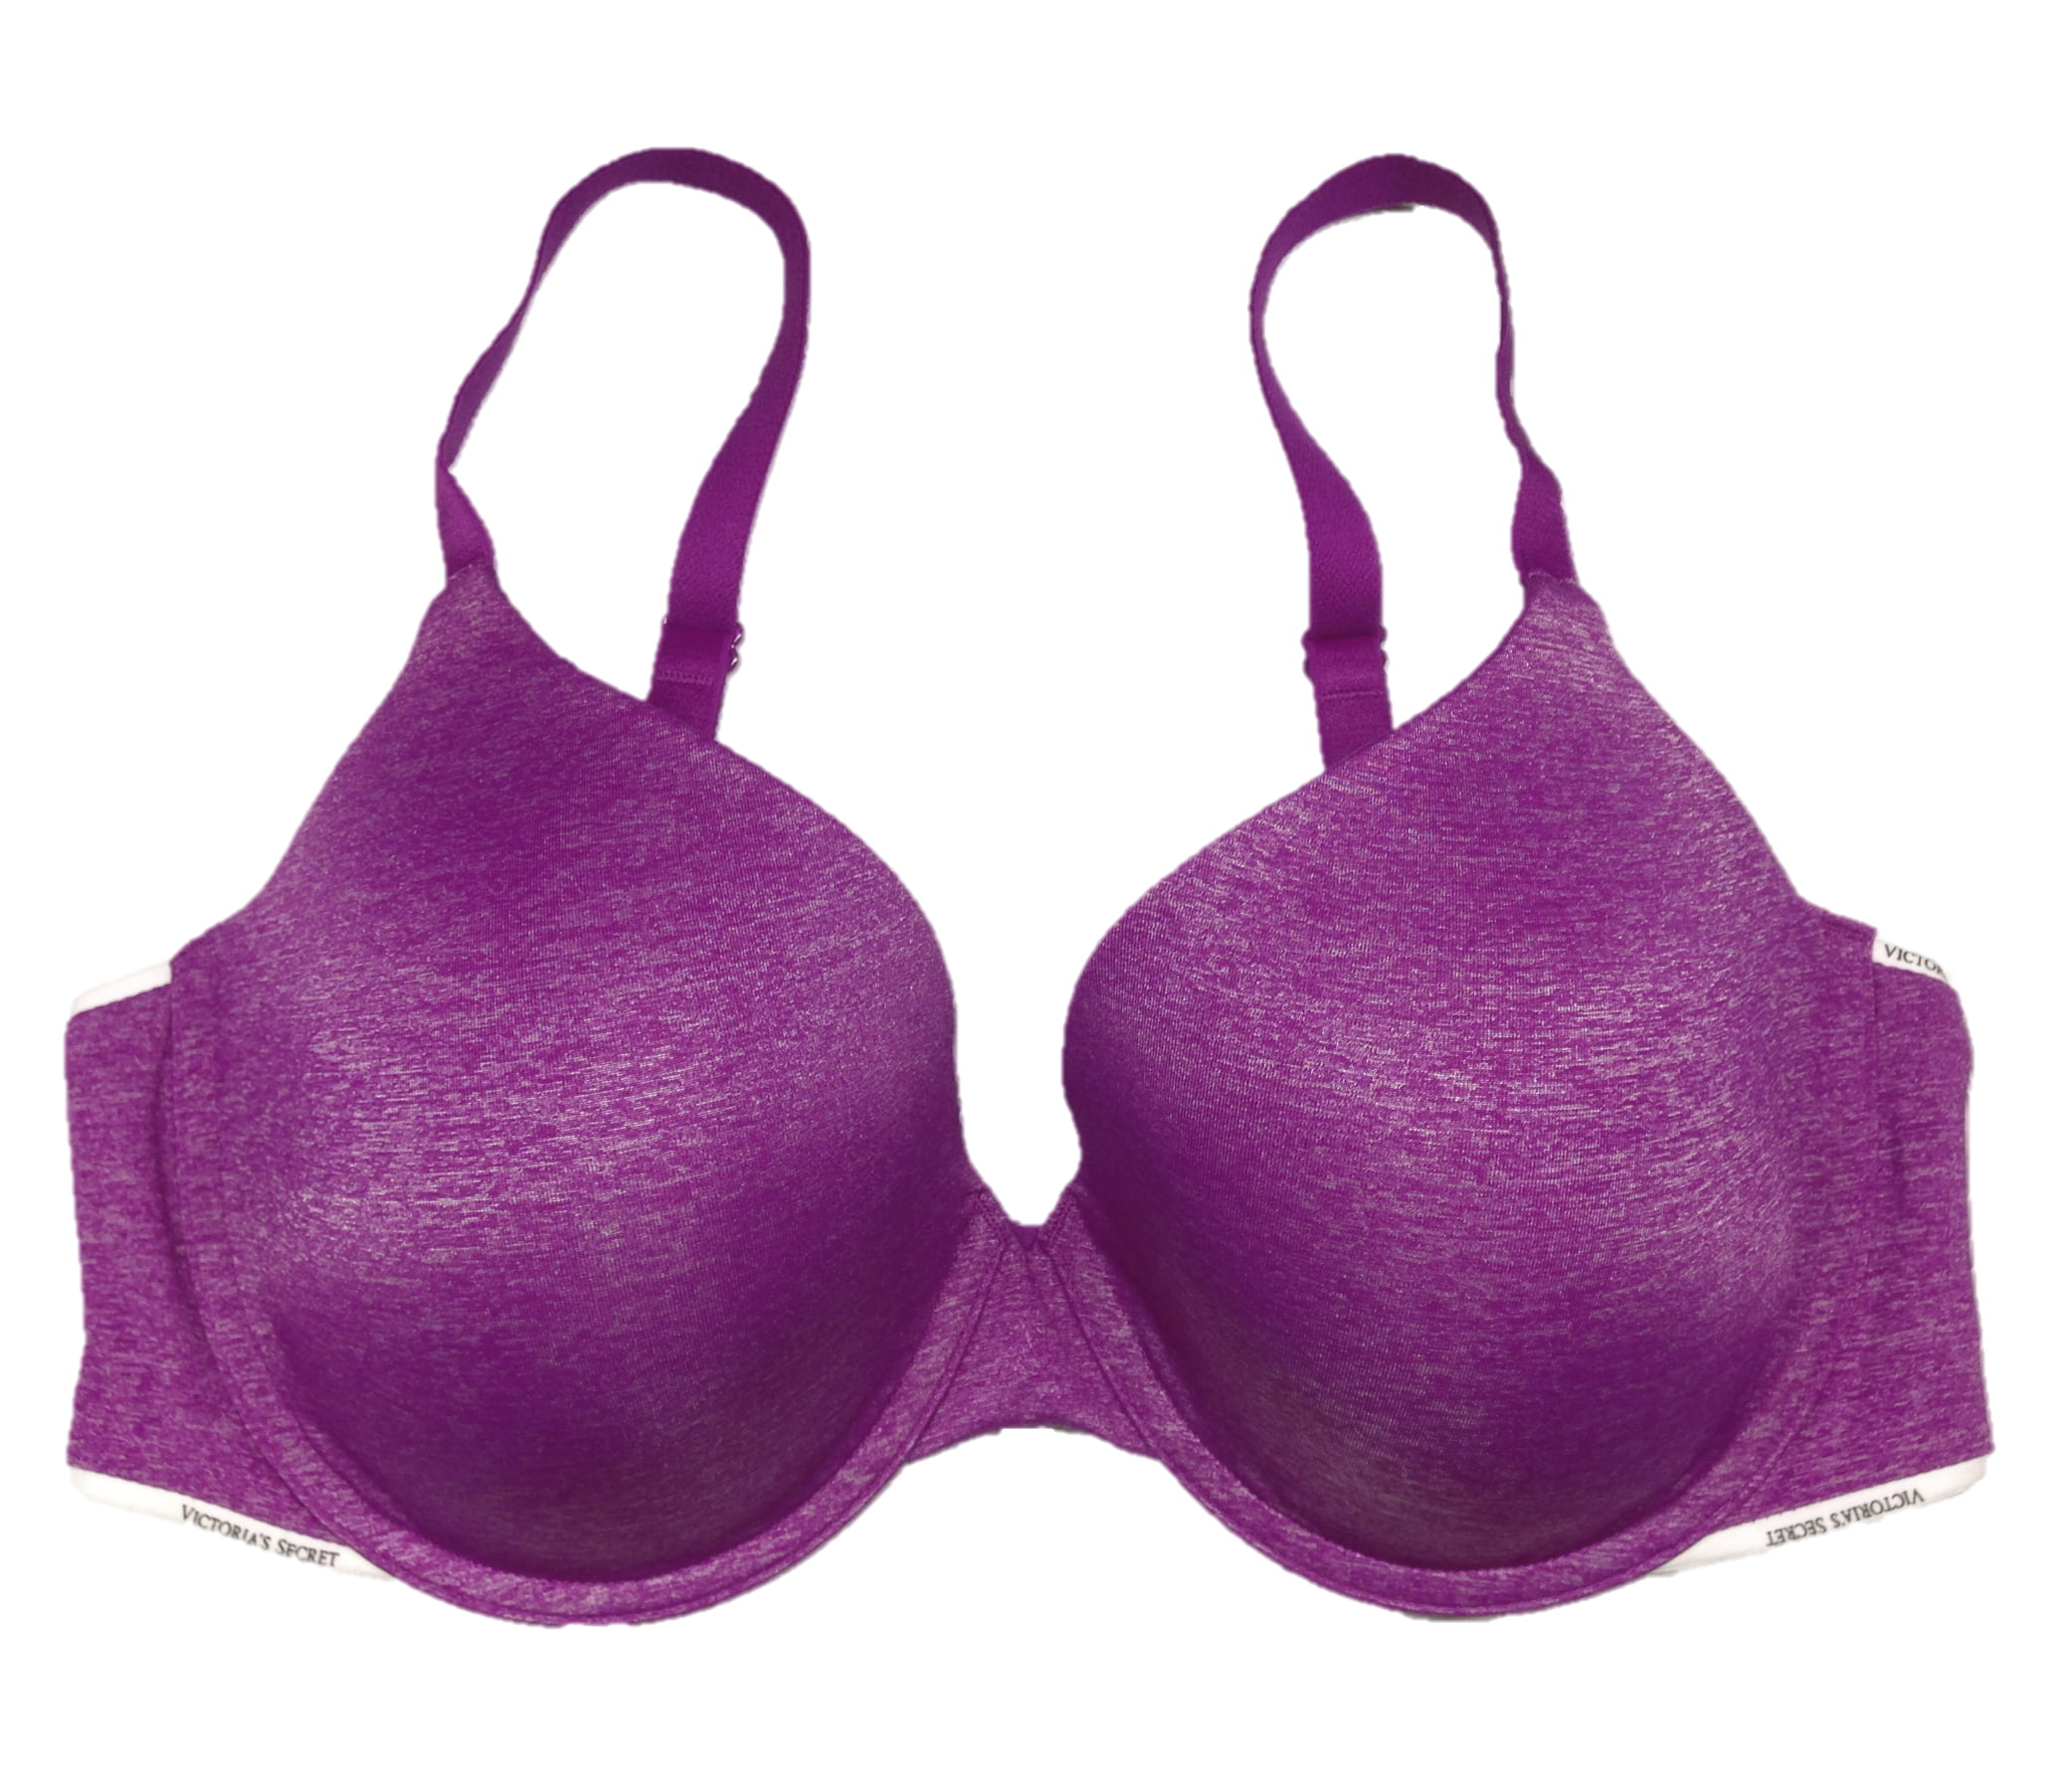 Victoria's Secret ,Plum, T-Shirt lightly lined full coverage, Bra, Size  34DDD, - $30 - From Gayle